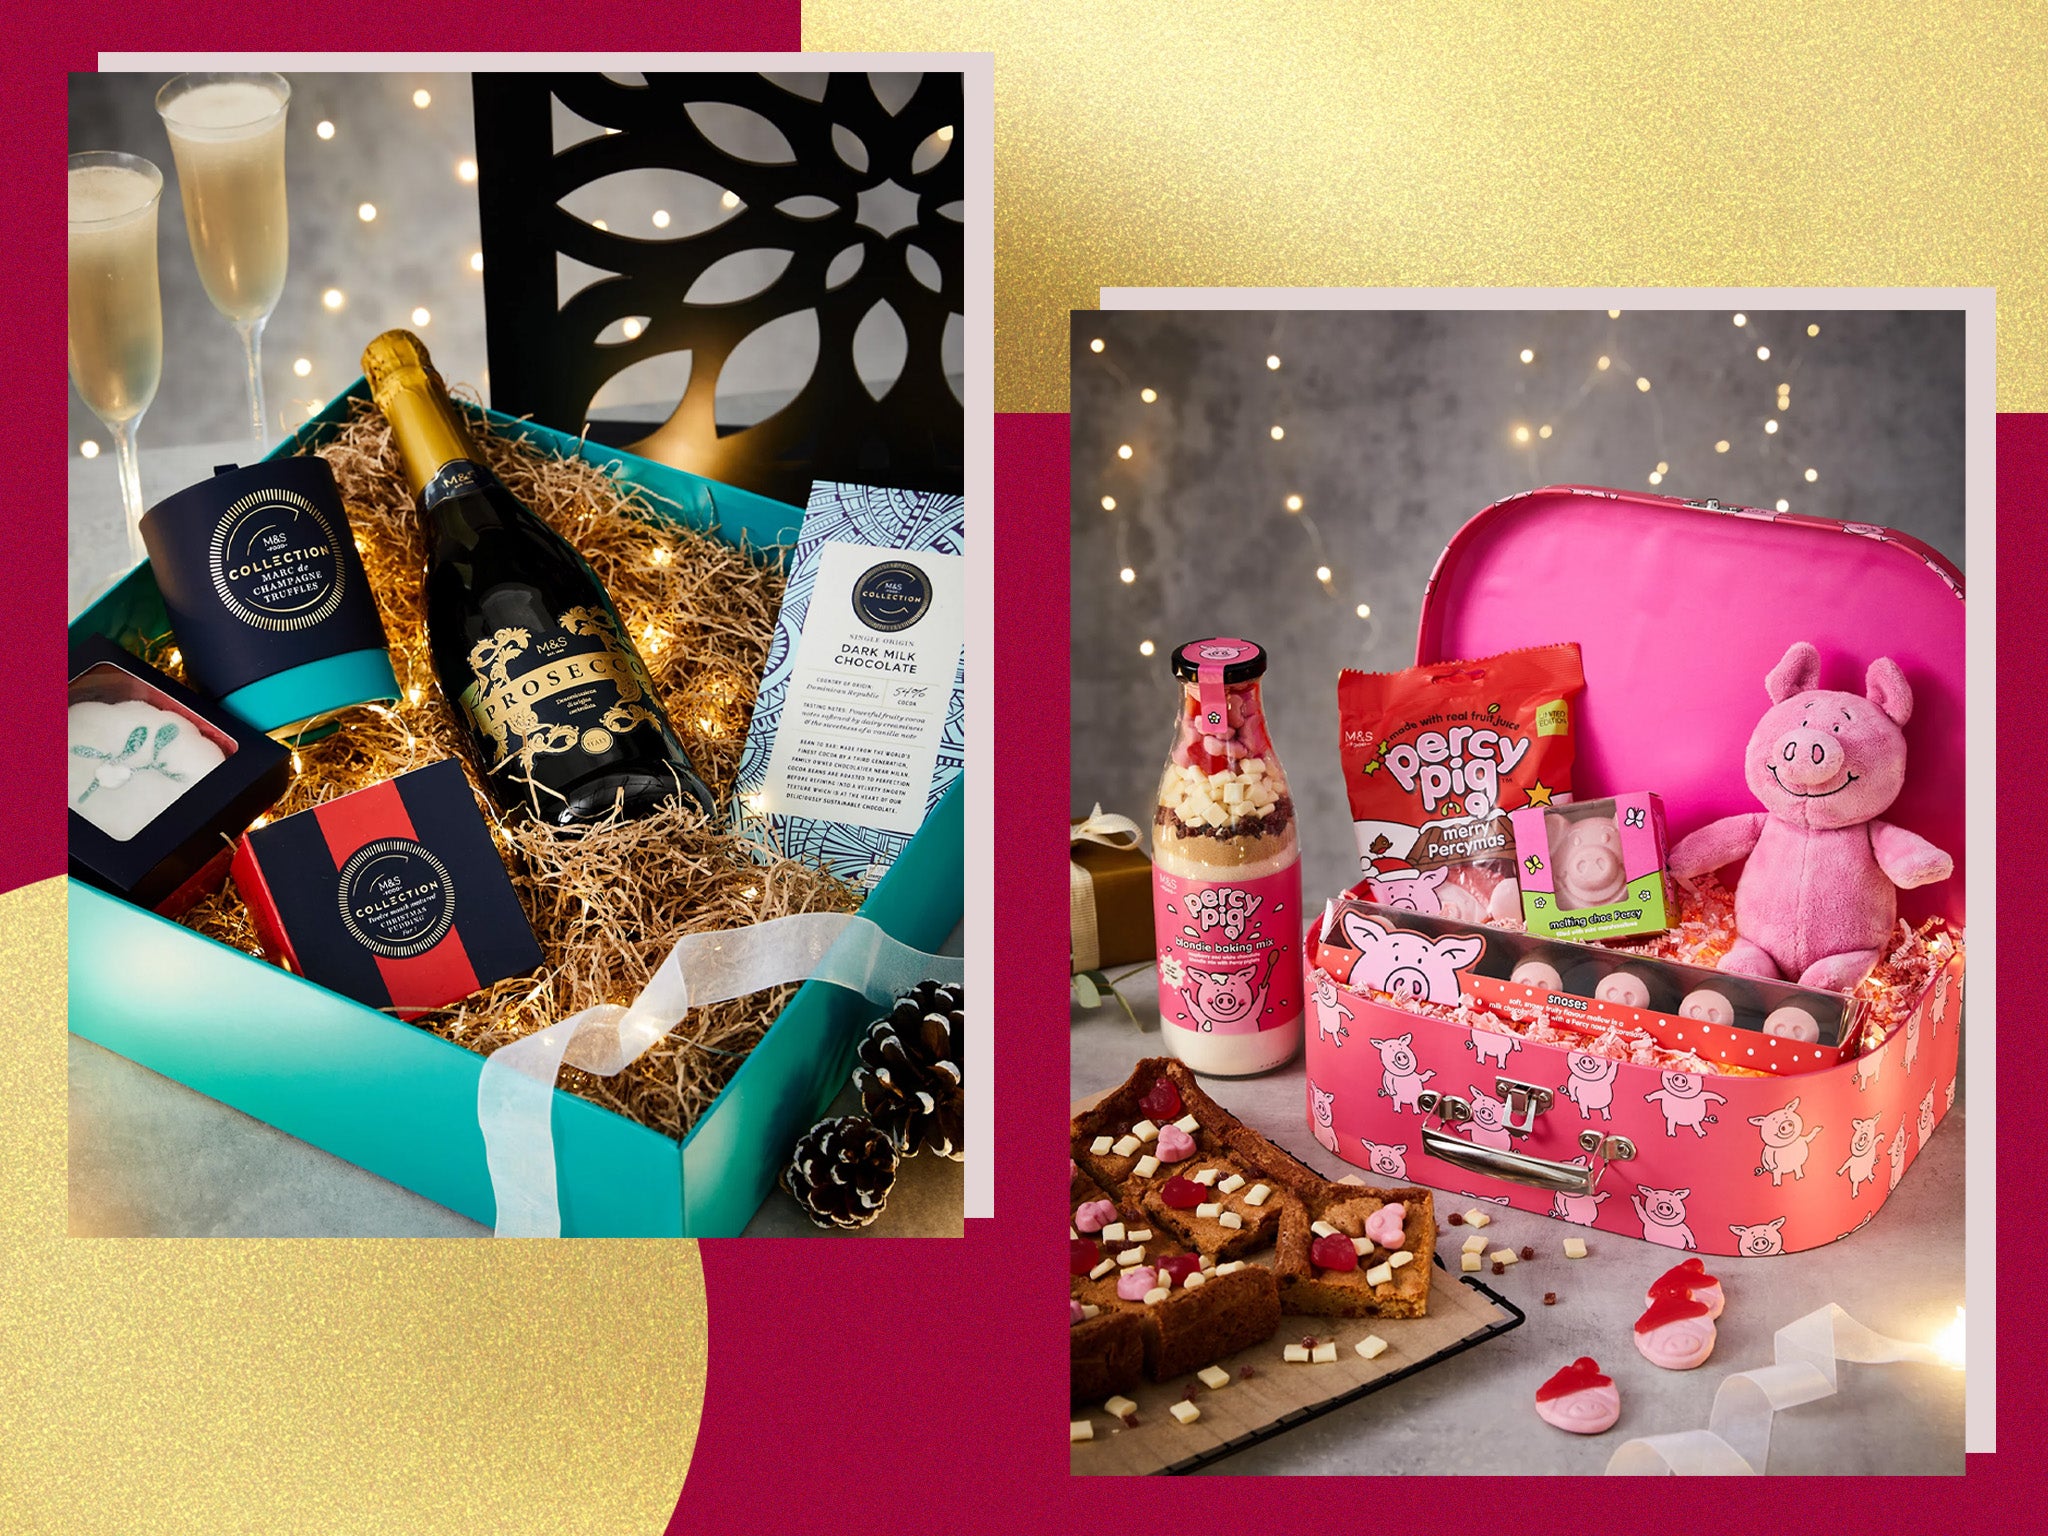 From hampers and gift boxes to suitcases, there’s something treat in store for everyone